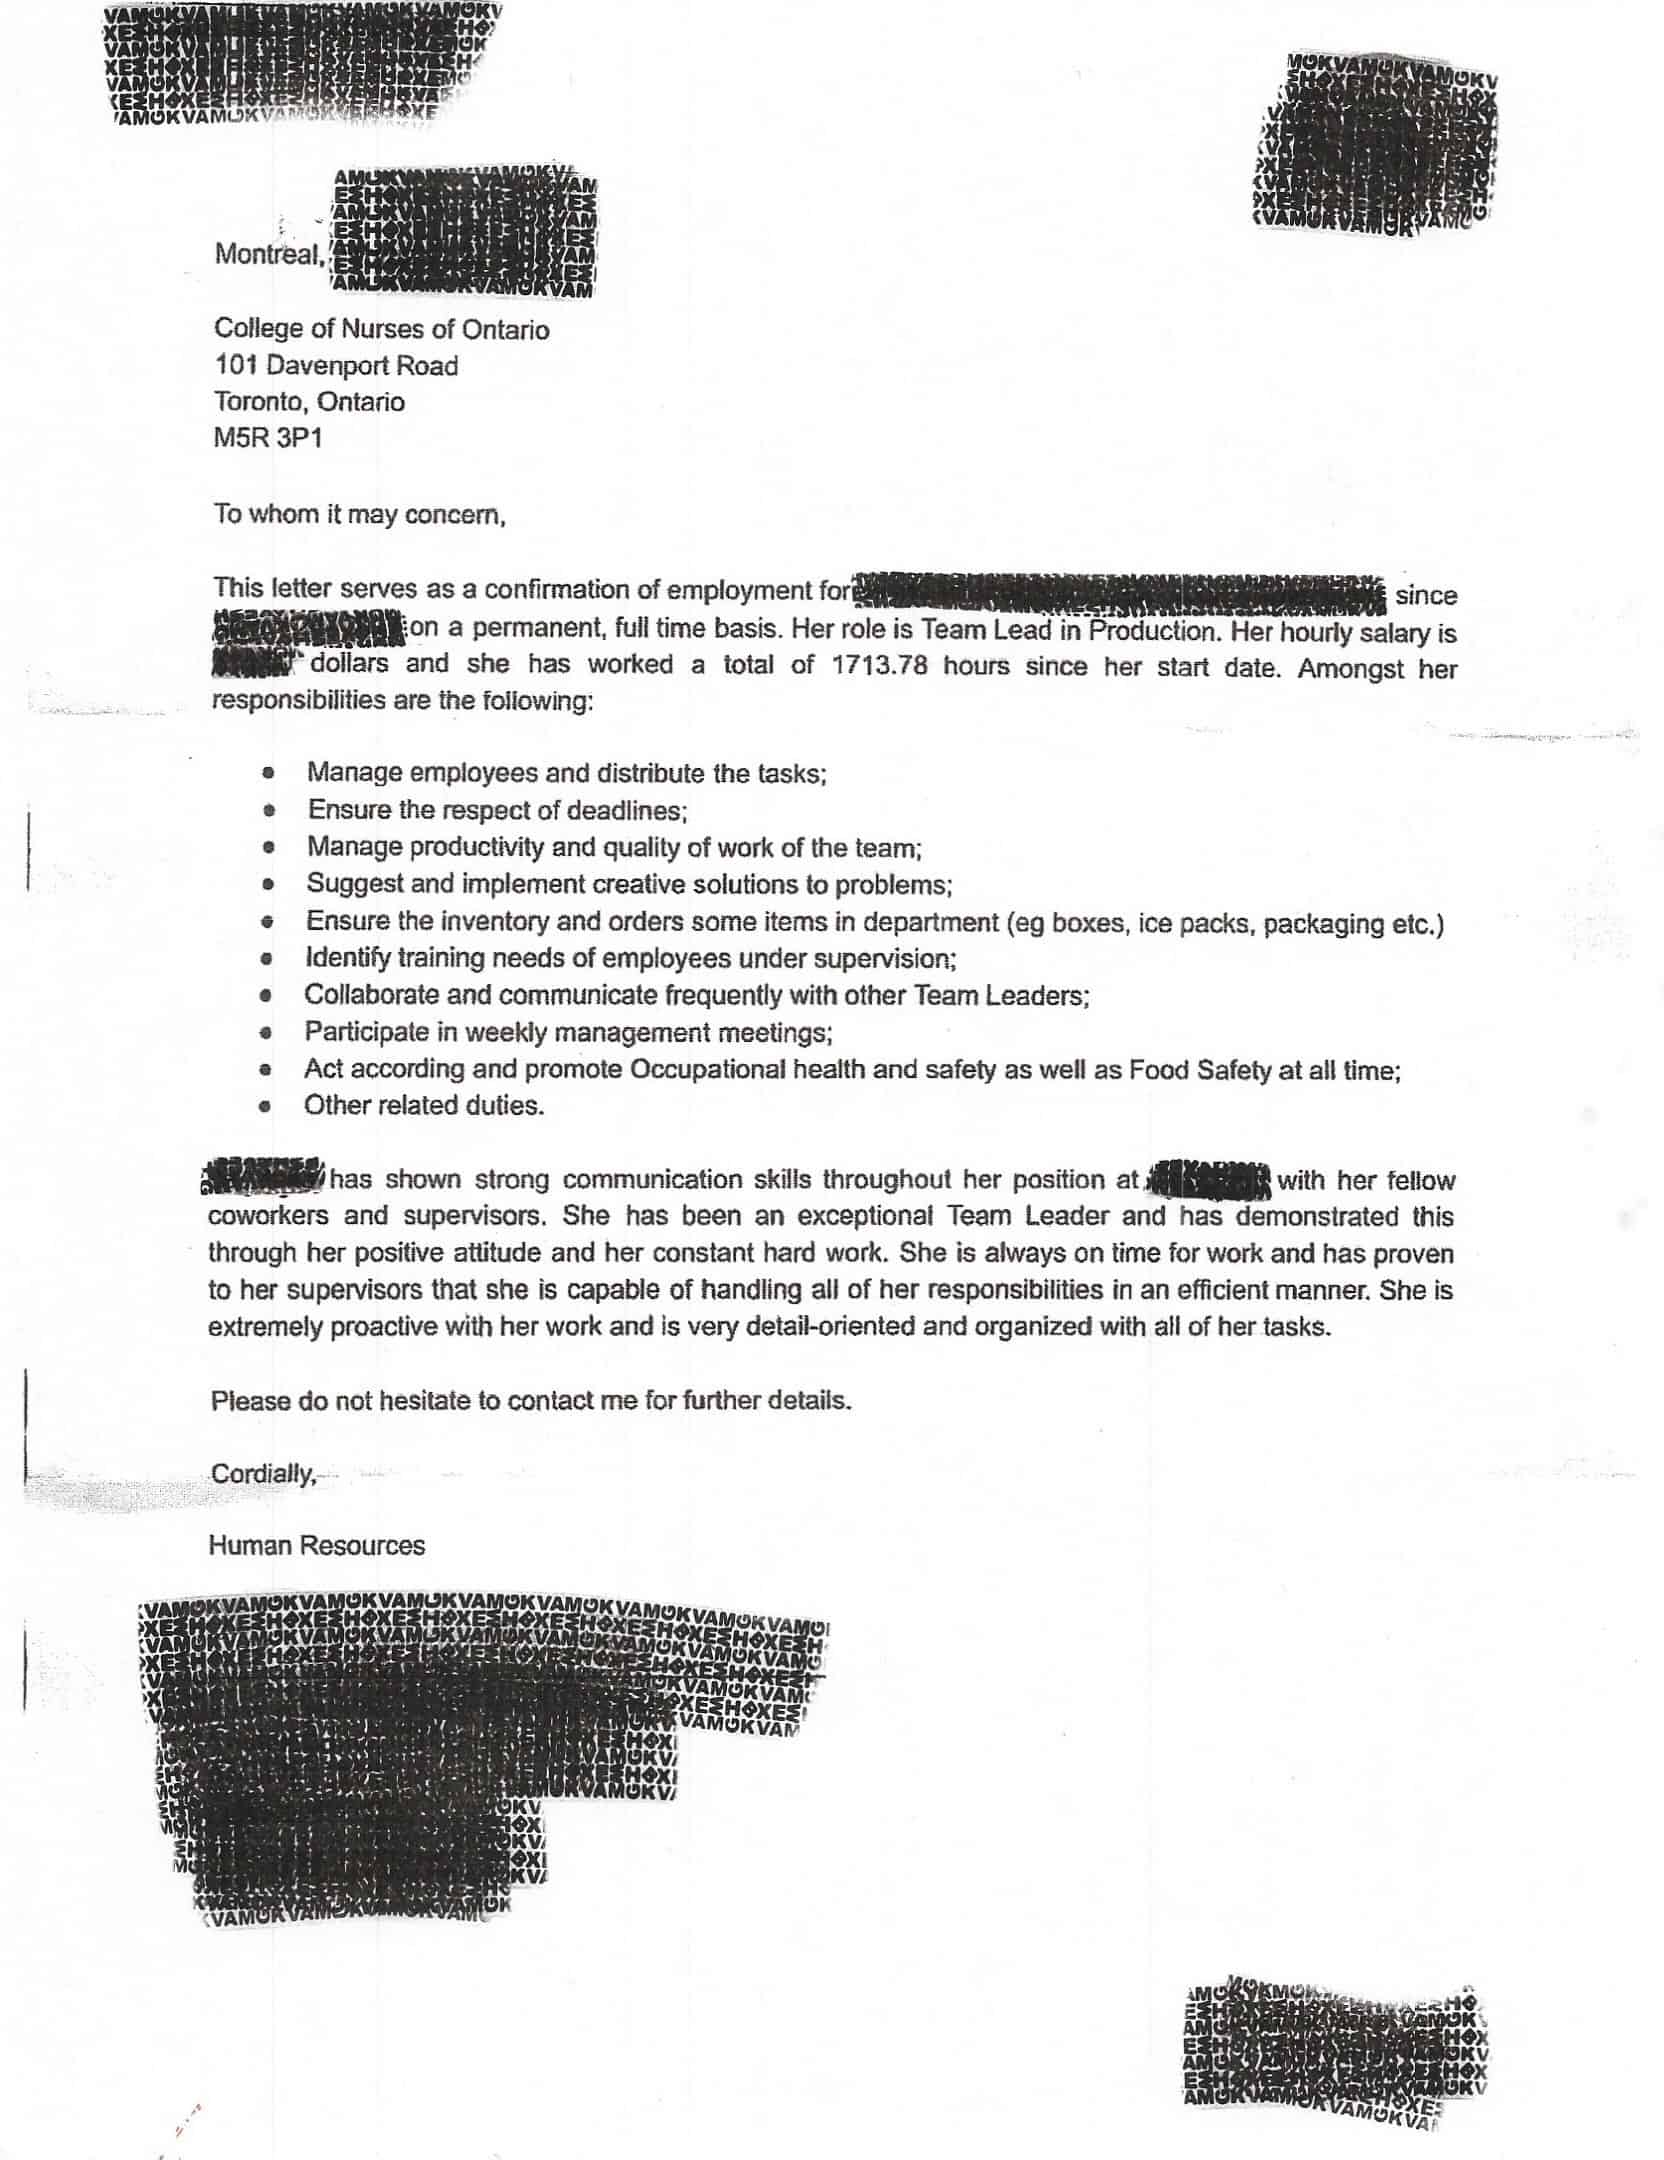 cno english proficiency letter from employer